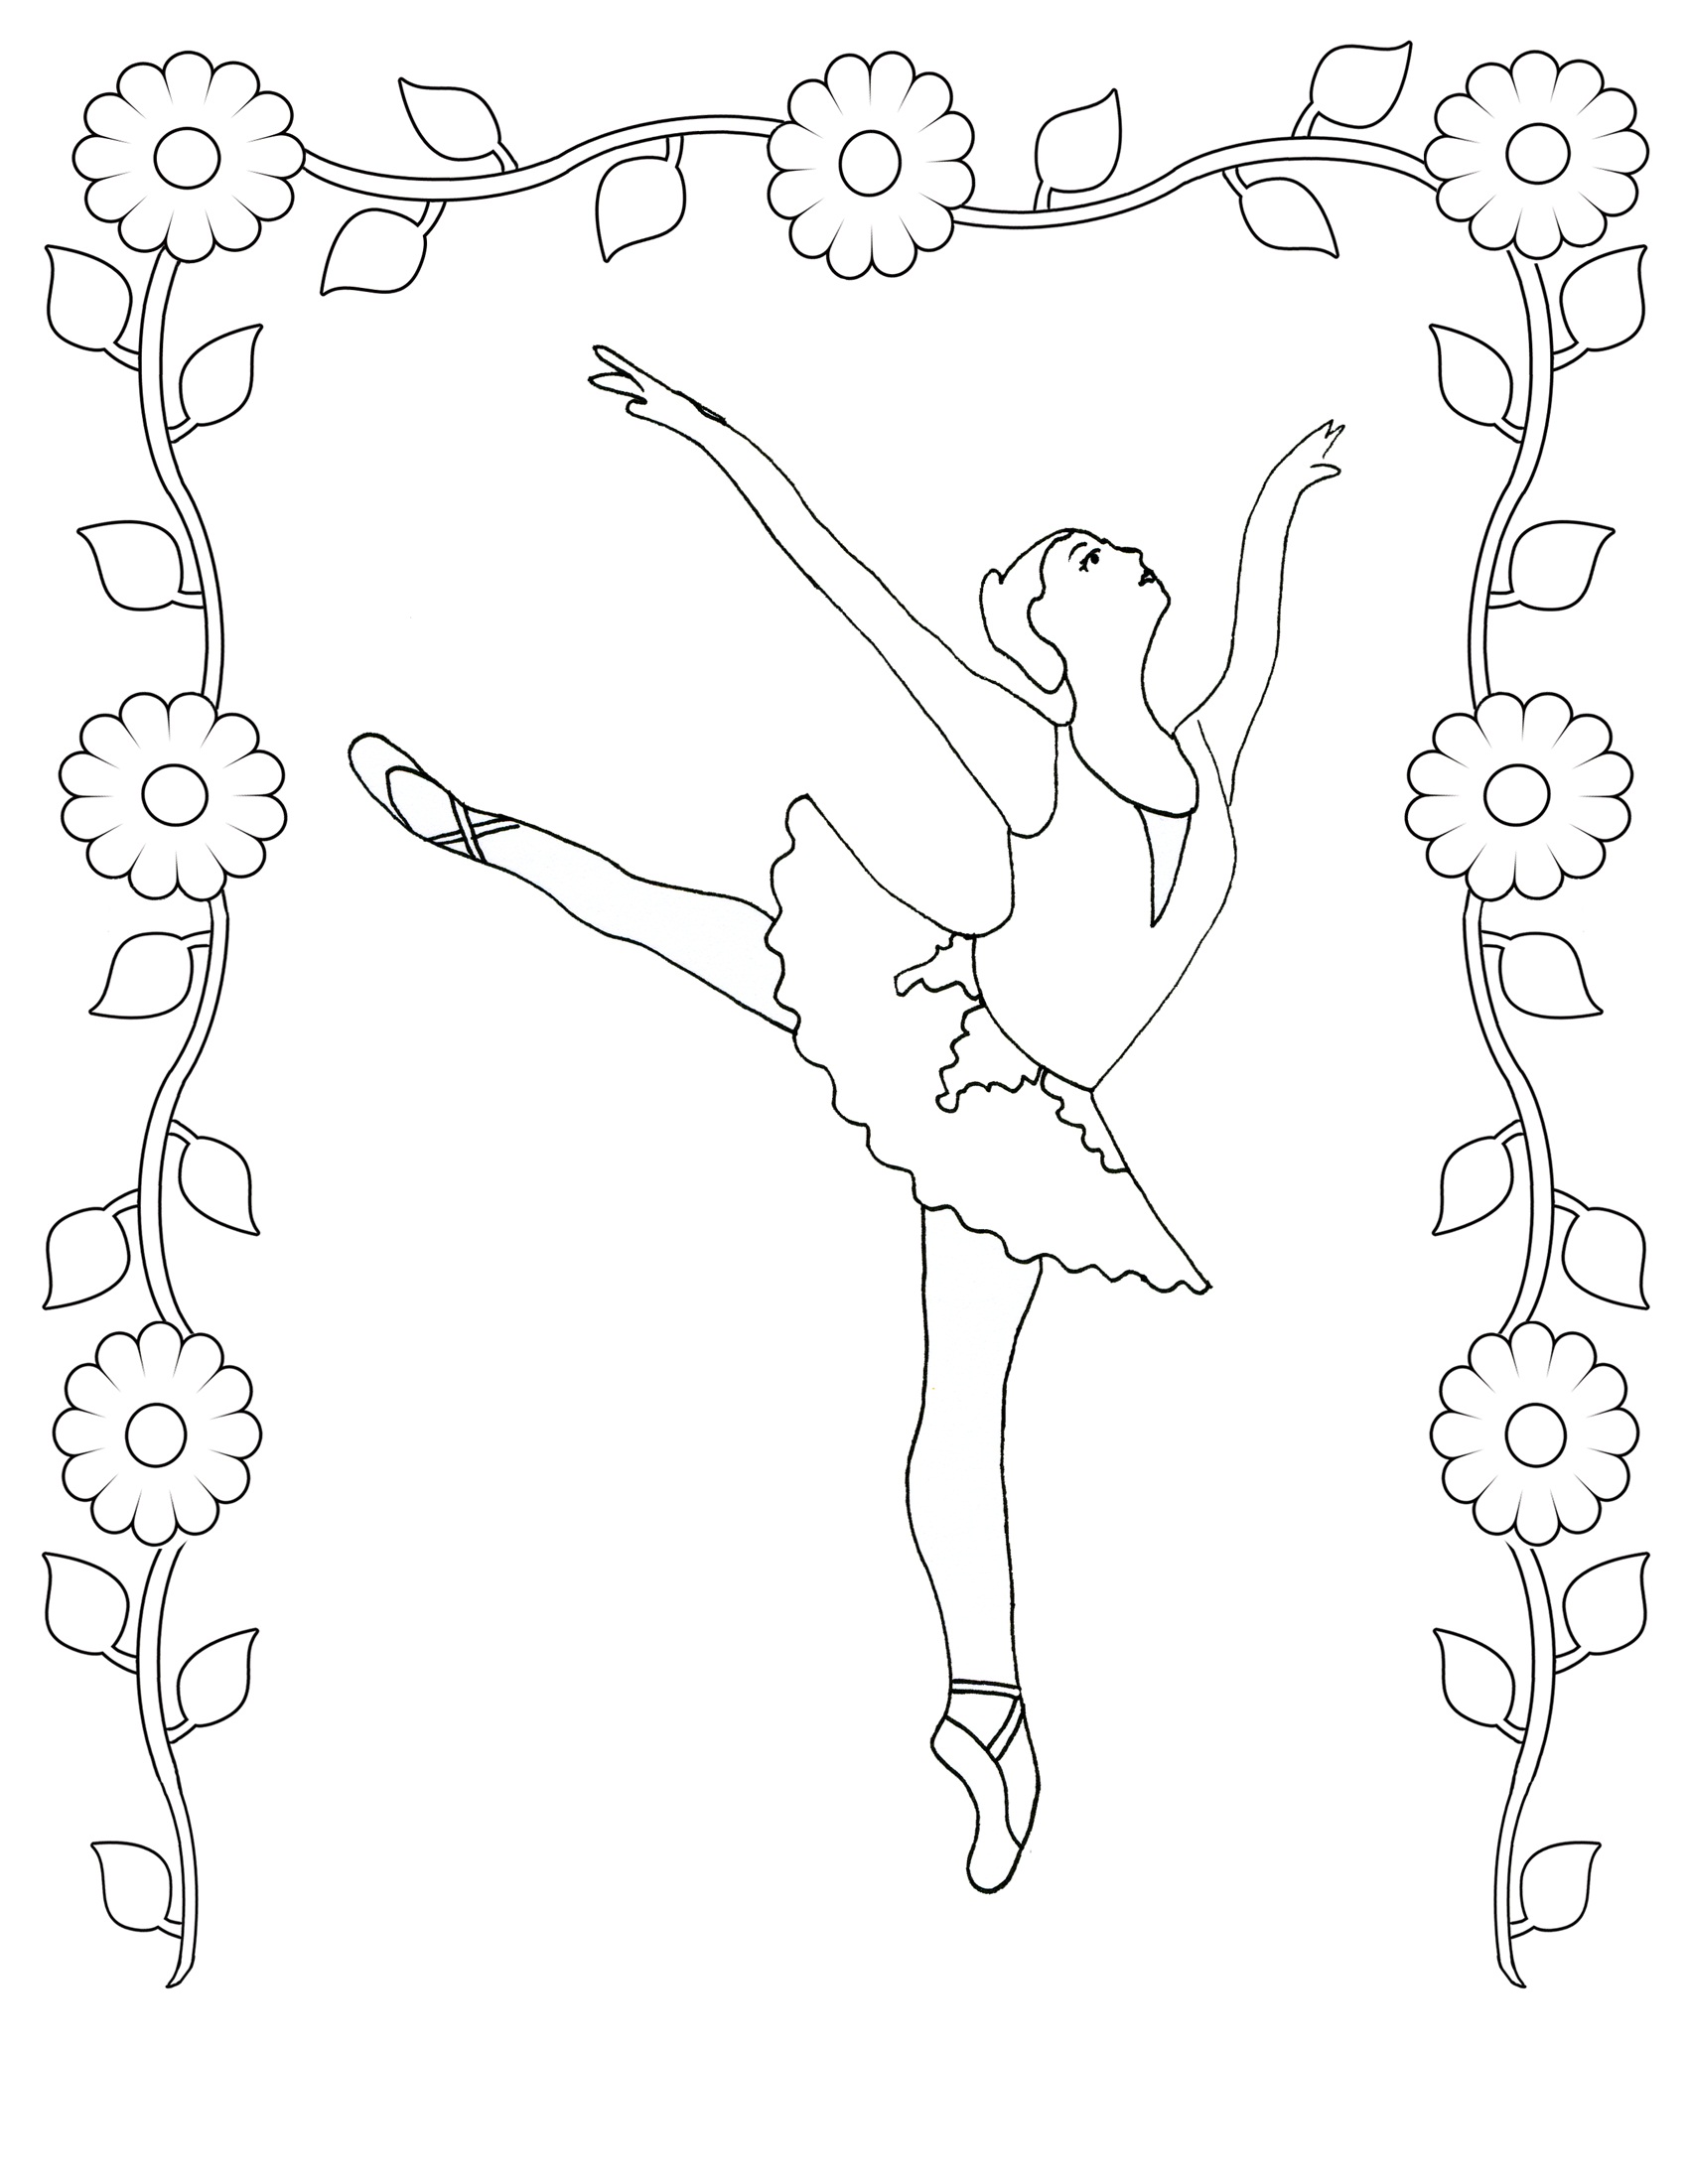 Free Printable Ballet Coloring Pages For Kids Effy Moom Free Coloring Picture wallpaper give a chance to color on the wall without getting in trouble! Fill the walls of your home or office with stress-relieving [effymoom.blogspot.com]